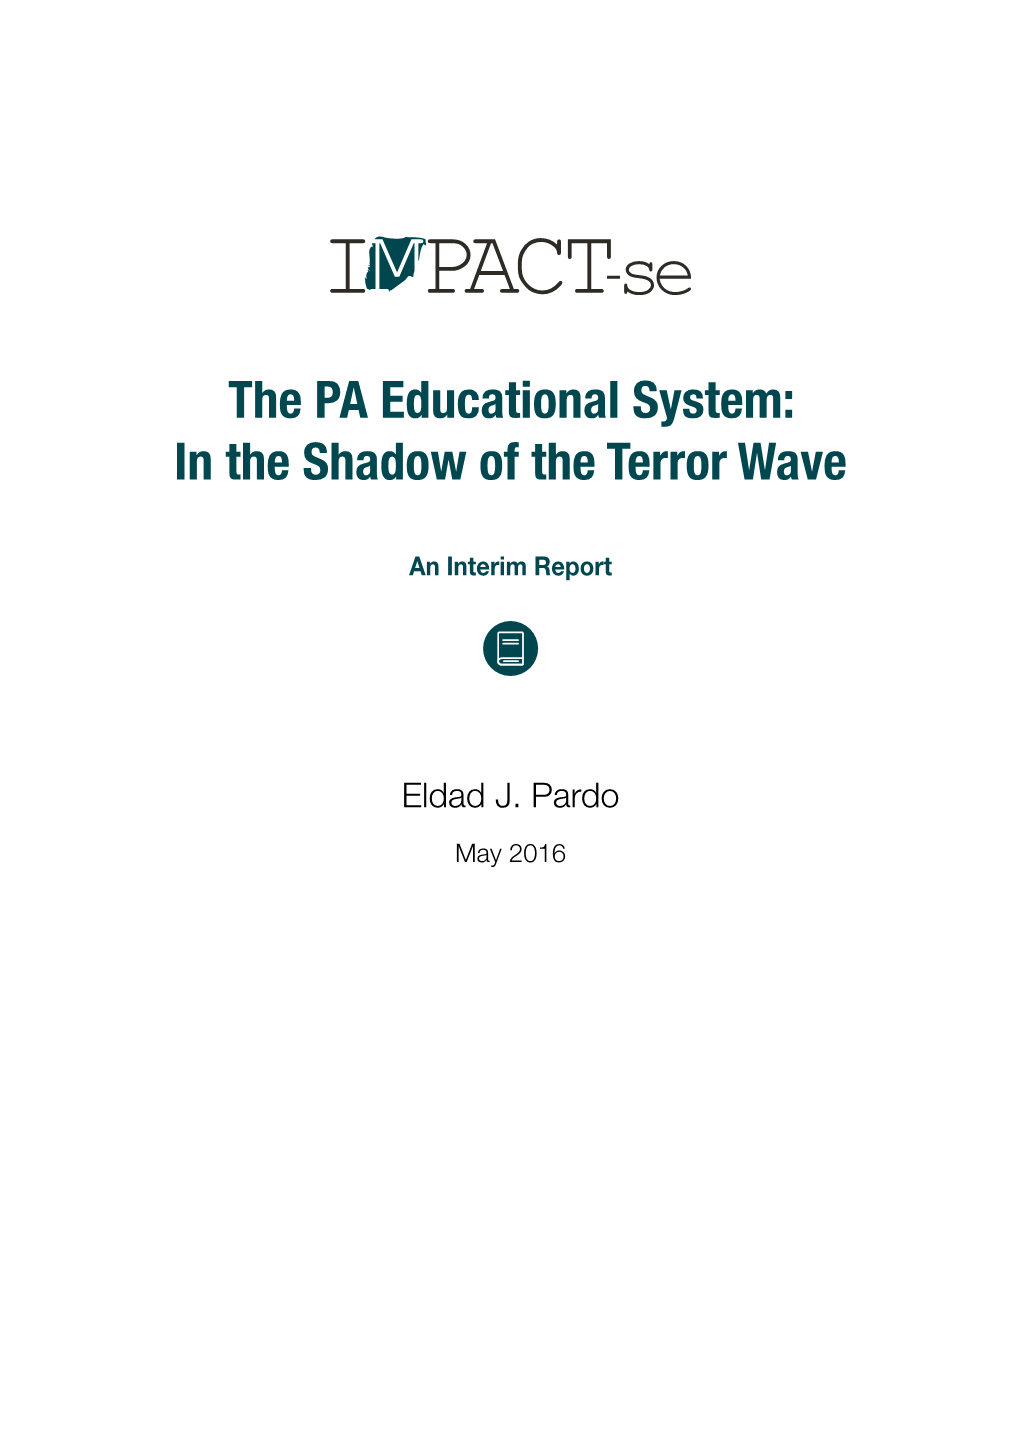 The PA Educational System: in the Shadow of the Terror Wave